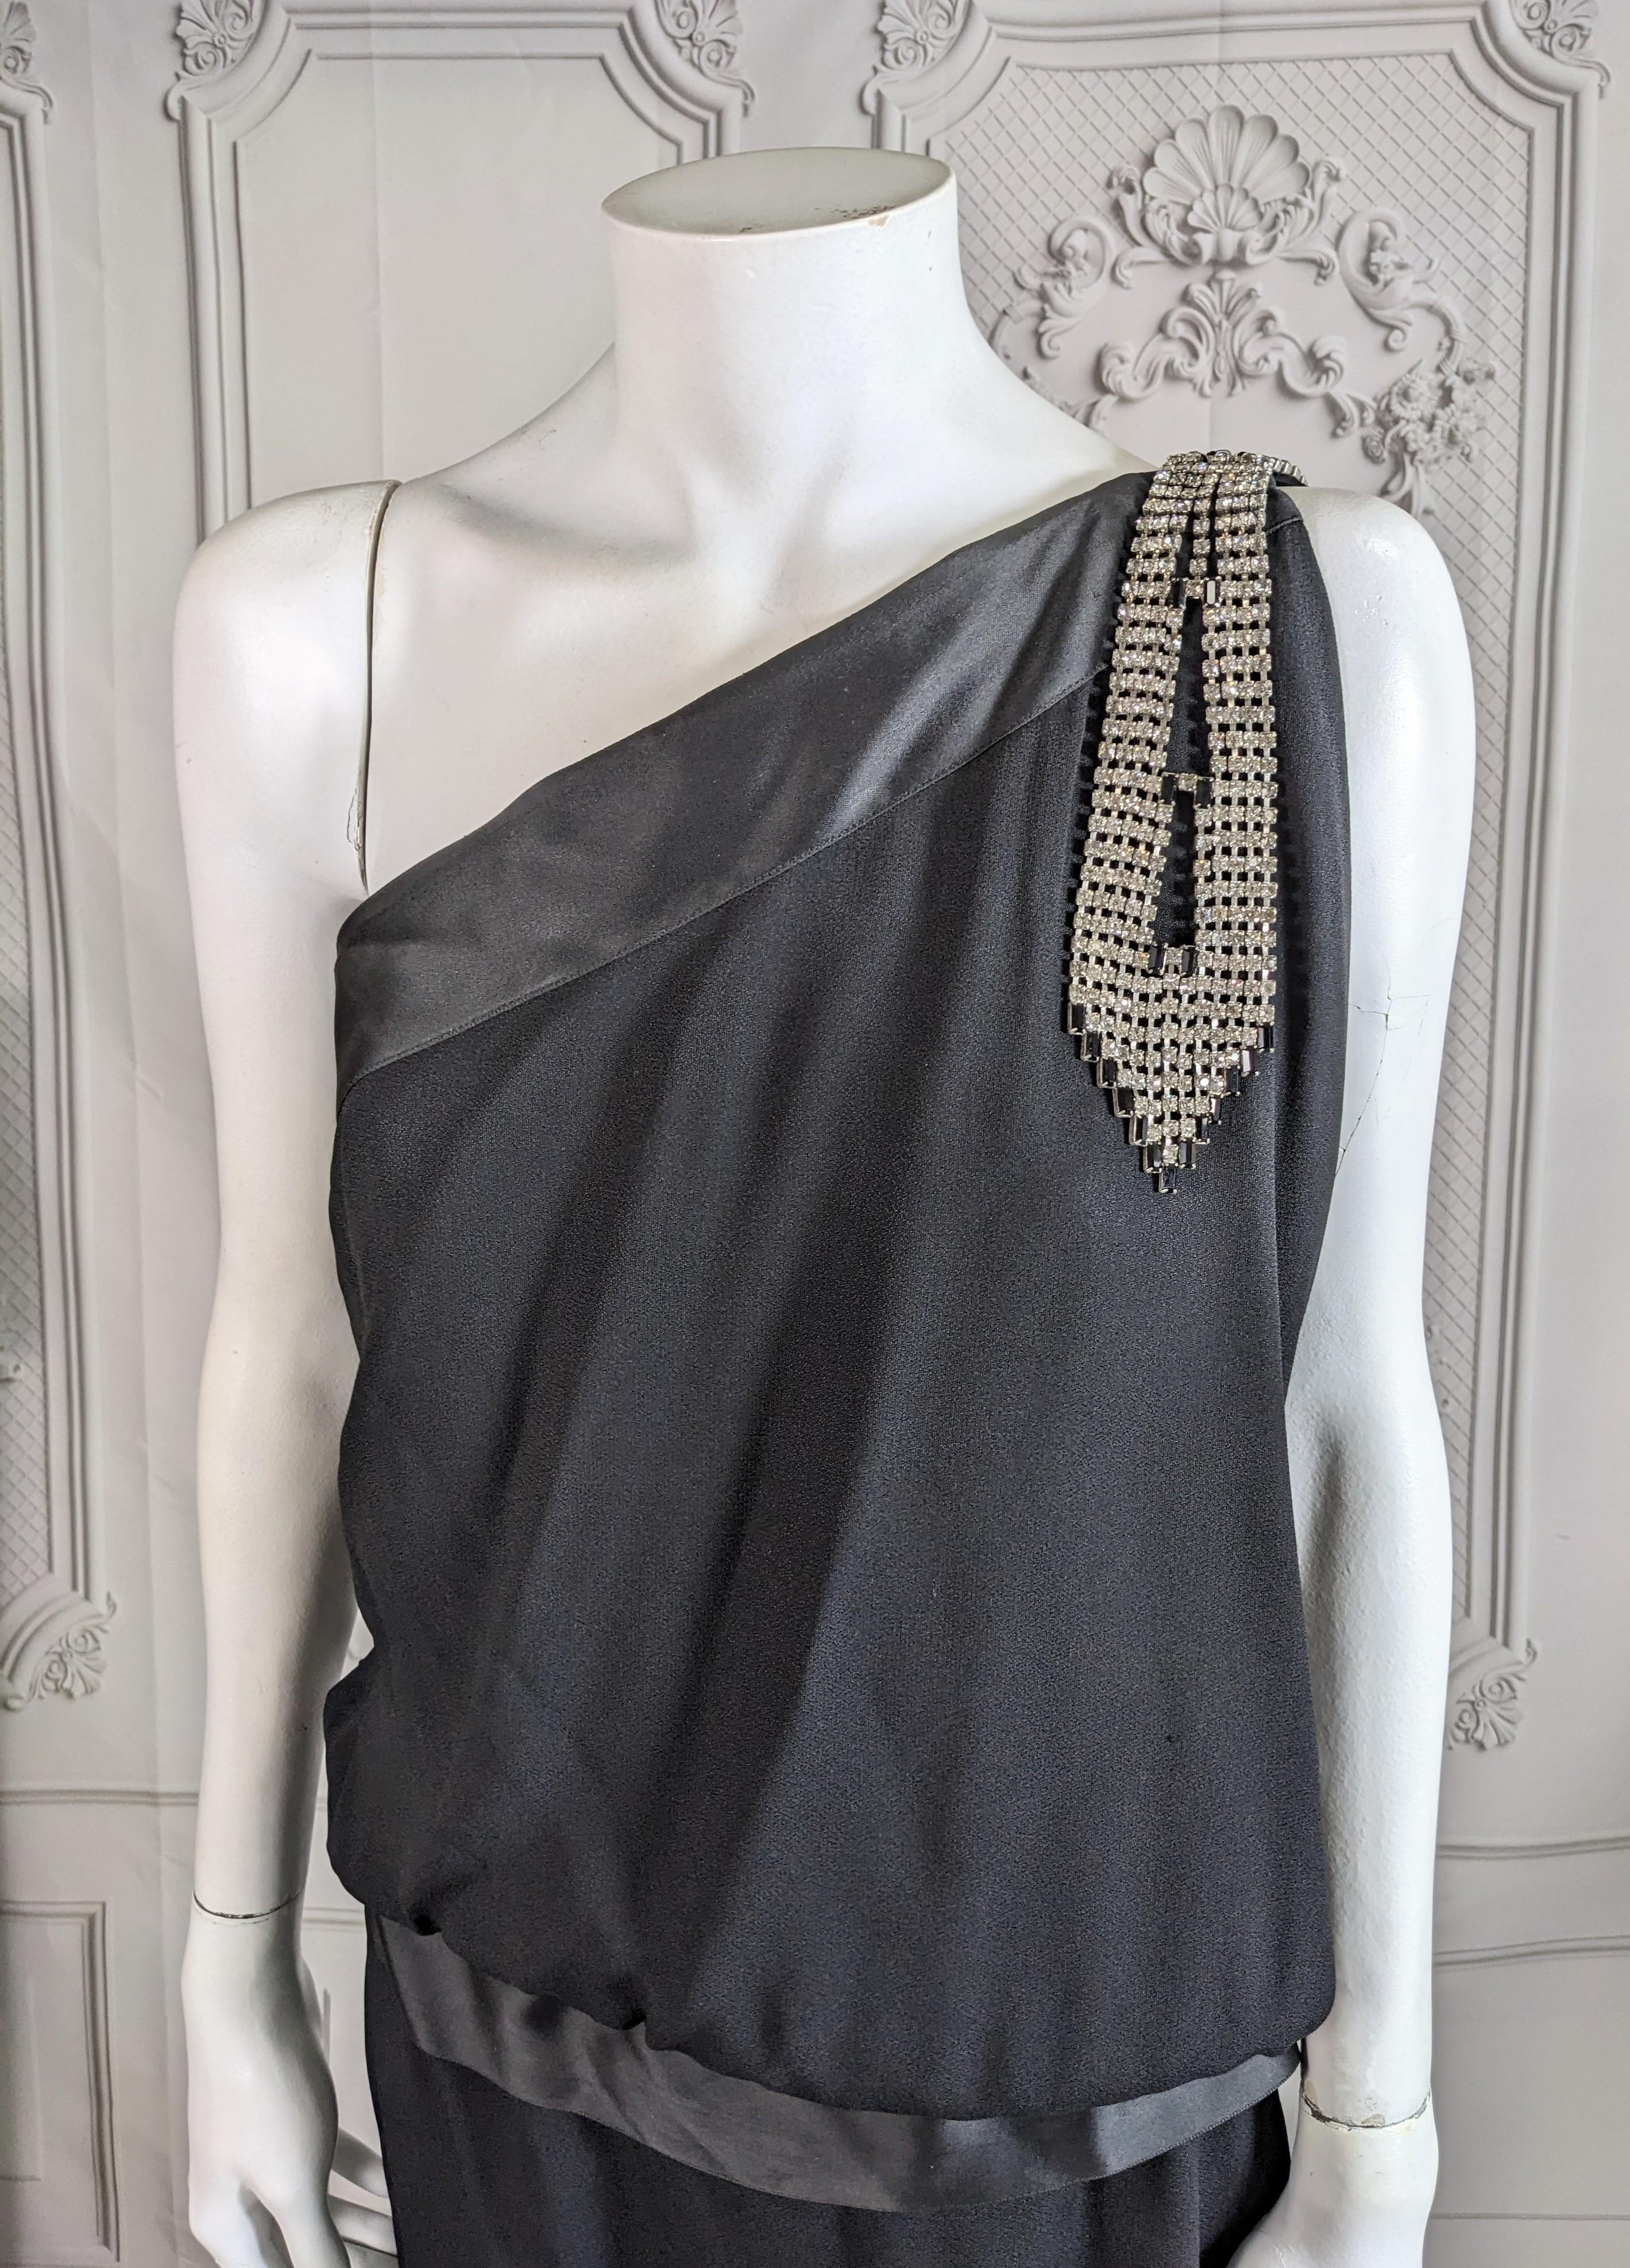 Bill Blass Satin Back Crepe Flapper Dress In Good Condition For Sale In New York, NY